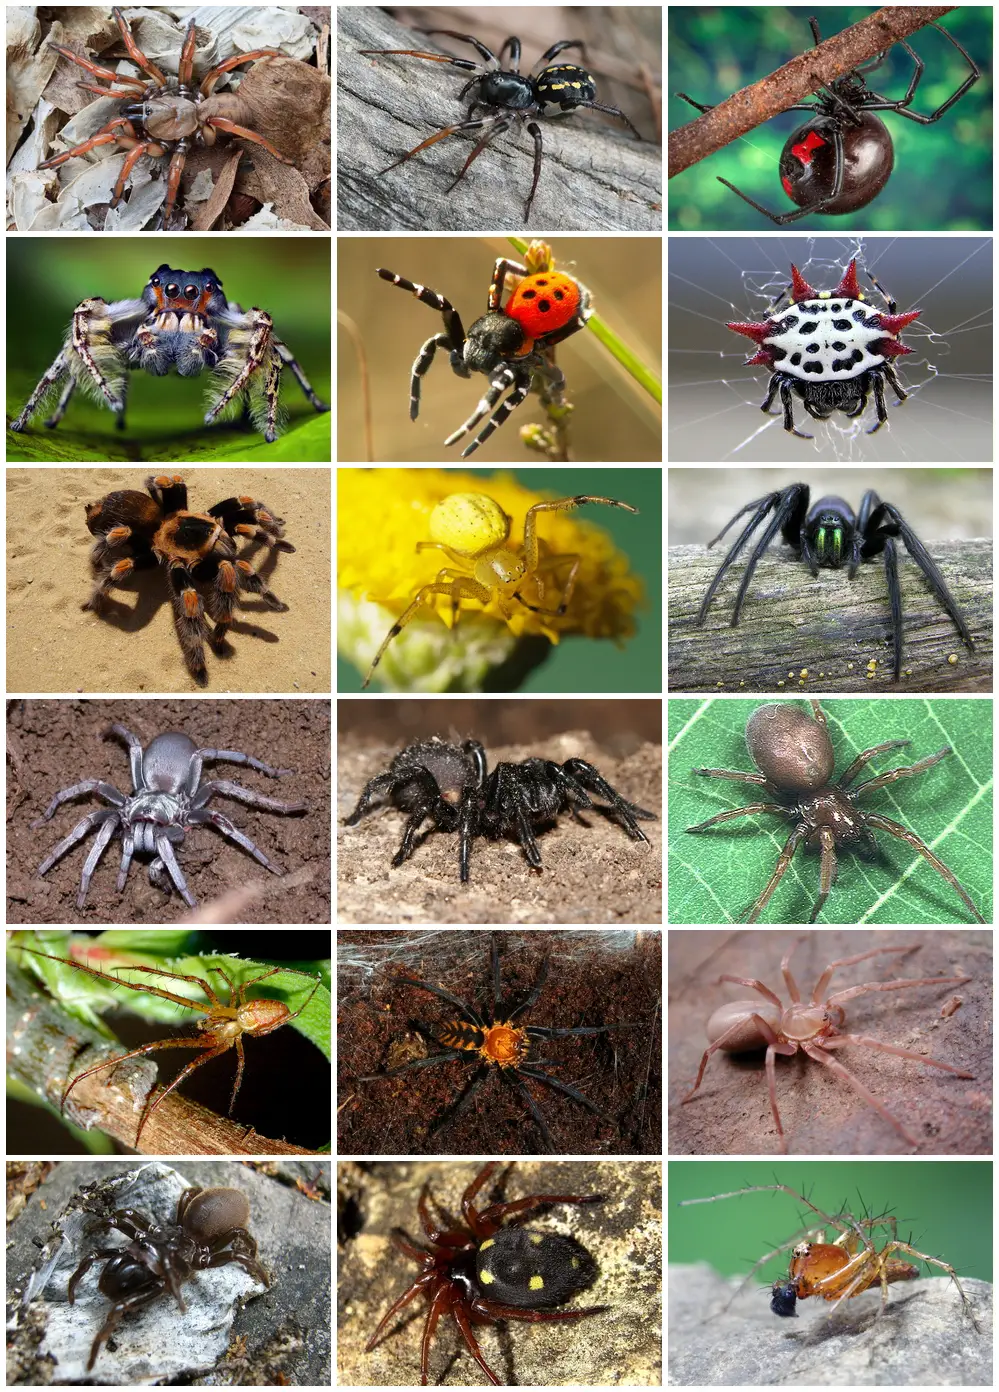 What Is A Spider?